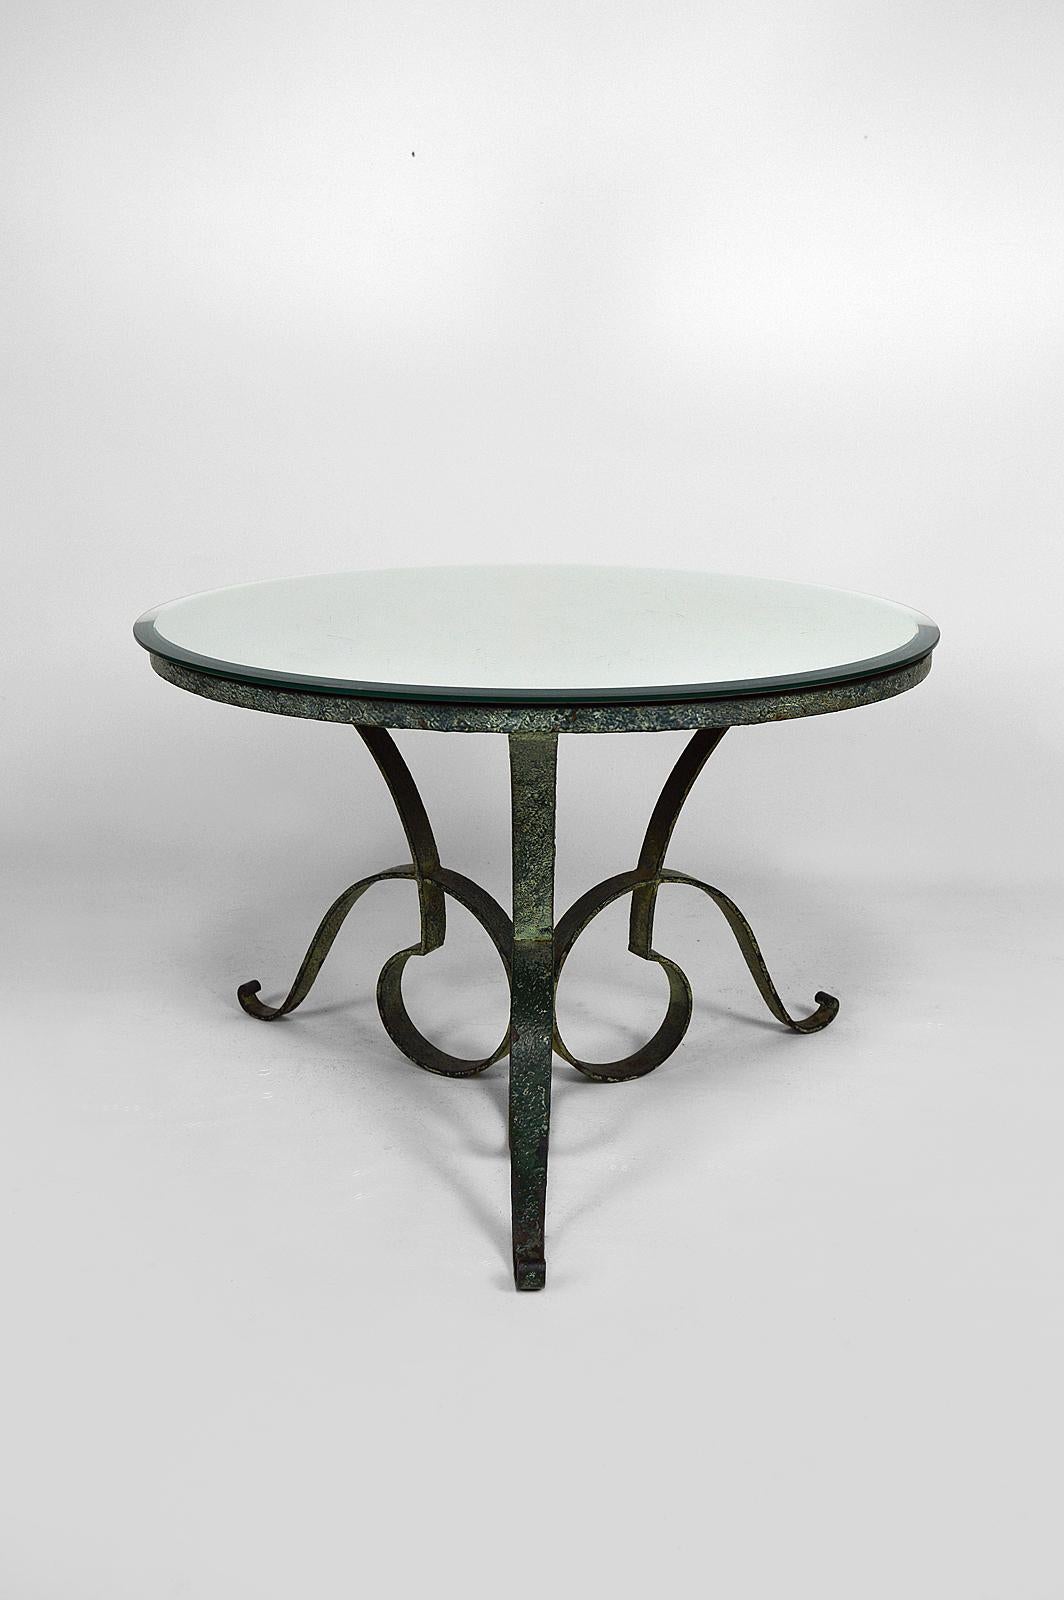 Elegant circular coffee / side table.

Wrought iron structure with green patina.
Beveled mirror tray.

In good condition, small lack of silvering on the mirror.
Art Deco, France, circa 1935.

Attributed to Raymond Subes (1891-1970), a